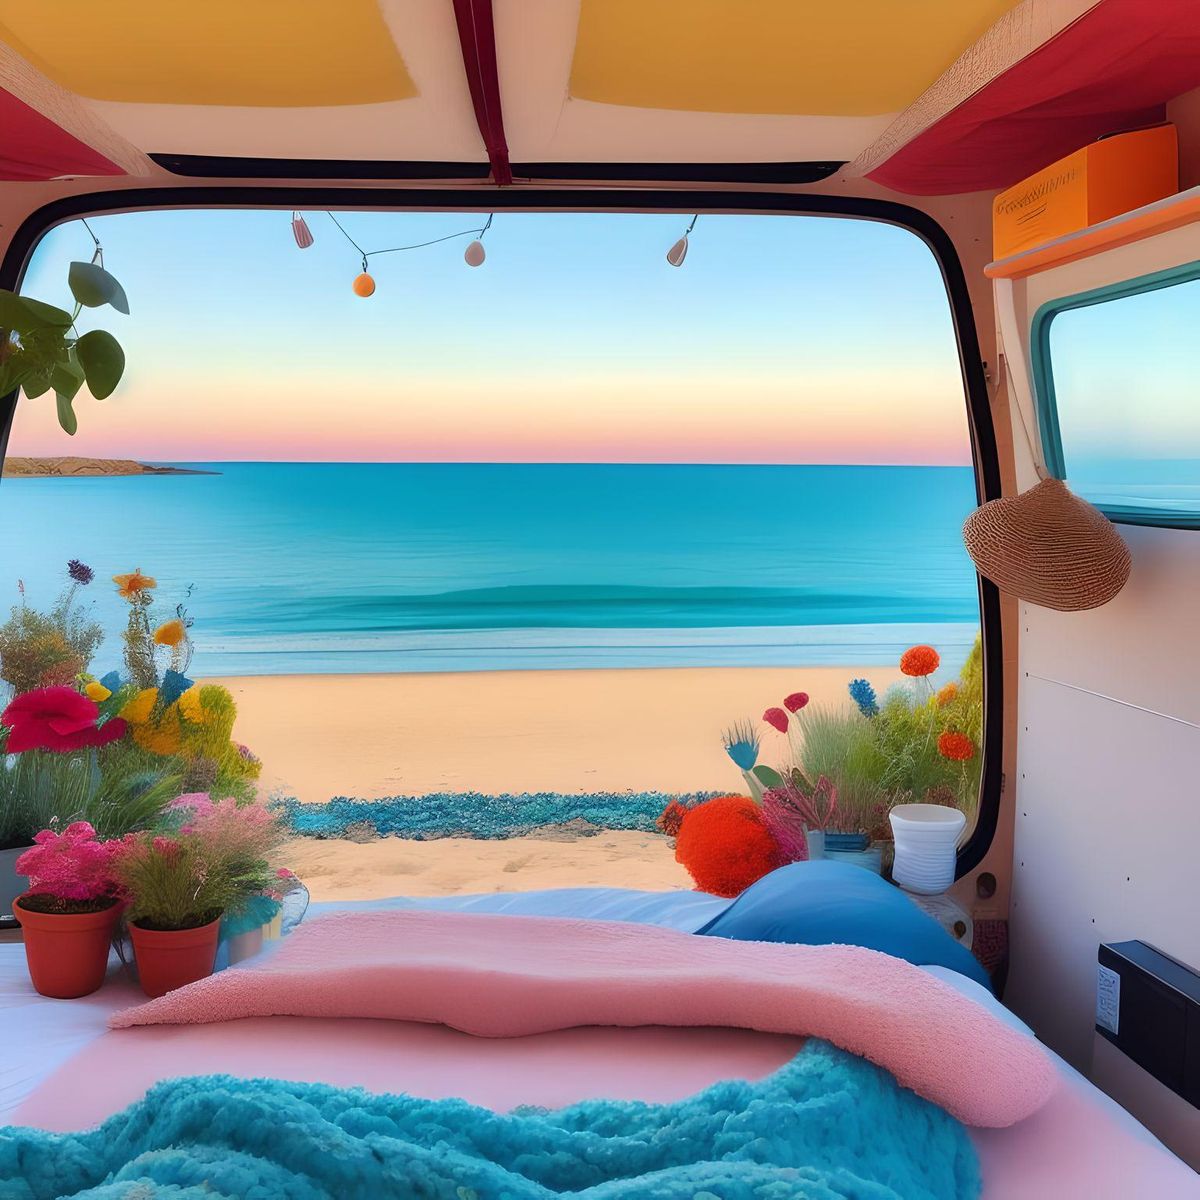 inside a cozy campervan, comfy bed and warm blanket, plants, flowers, decoration, view from the back on quiet beach, sunrise, peaceful, vibrant colors, lineart